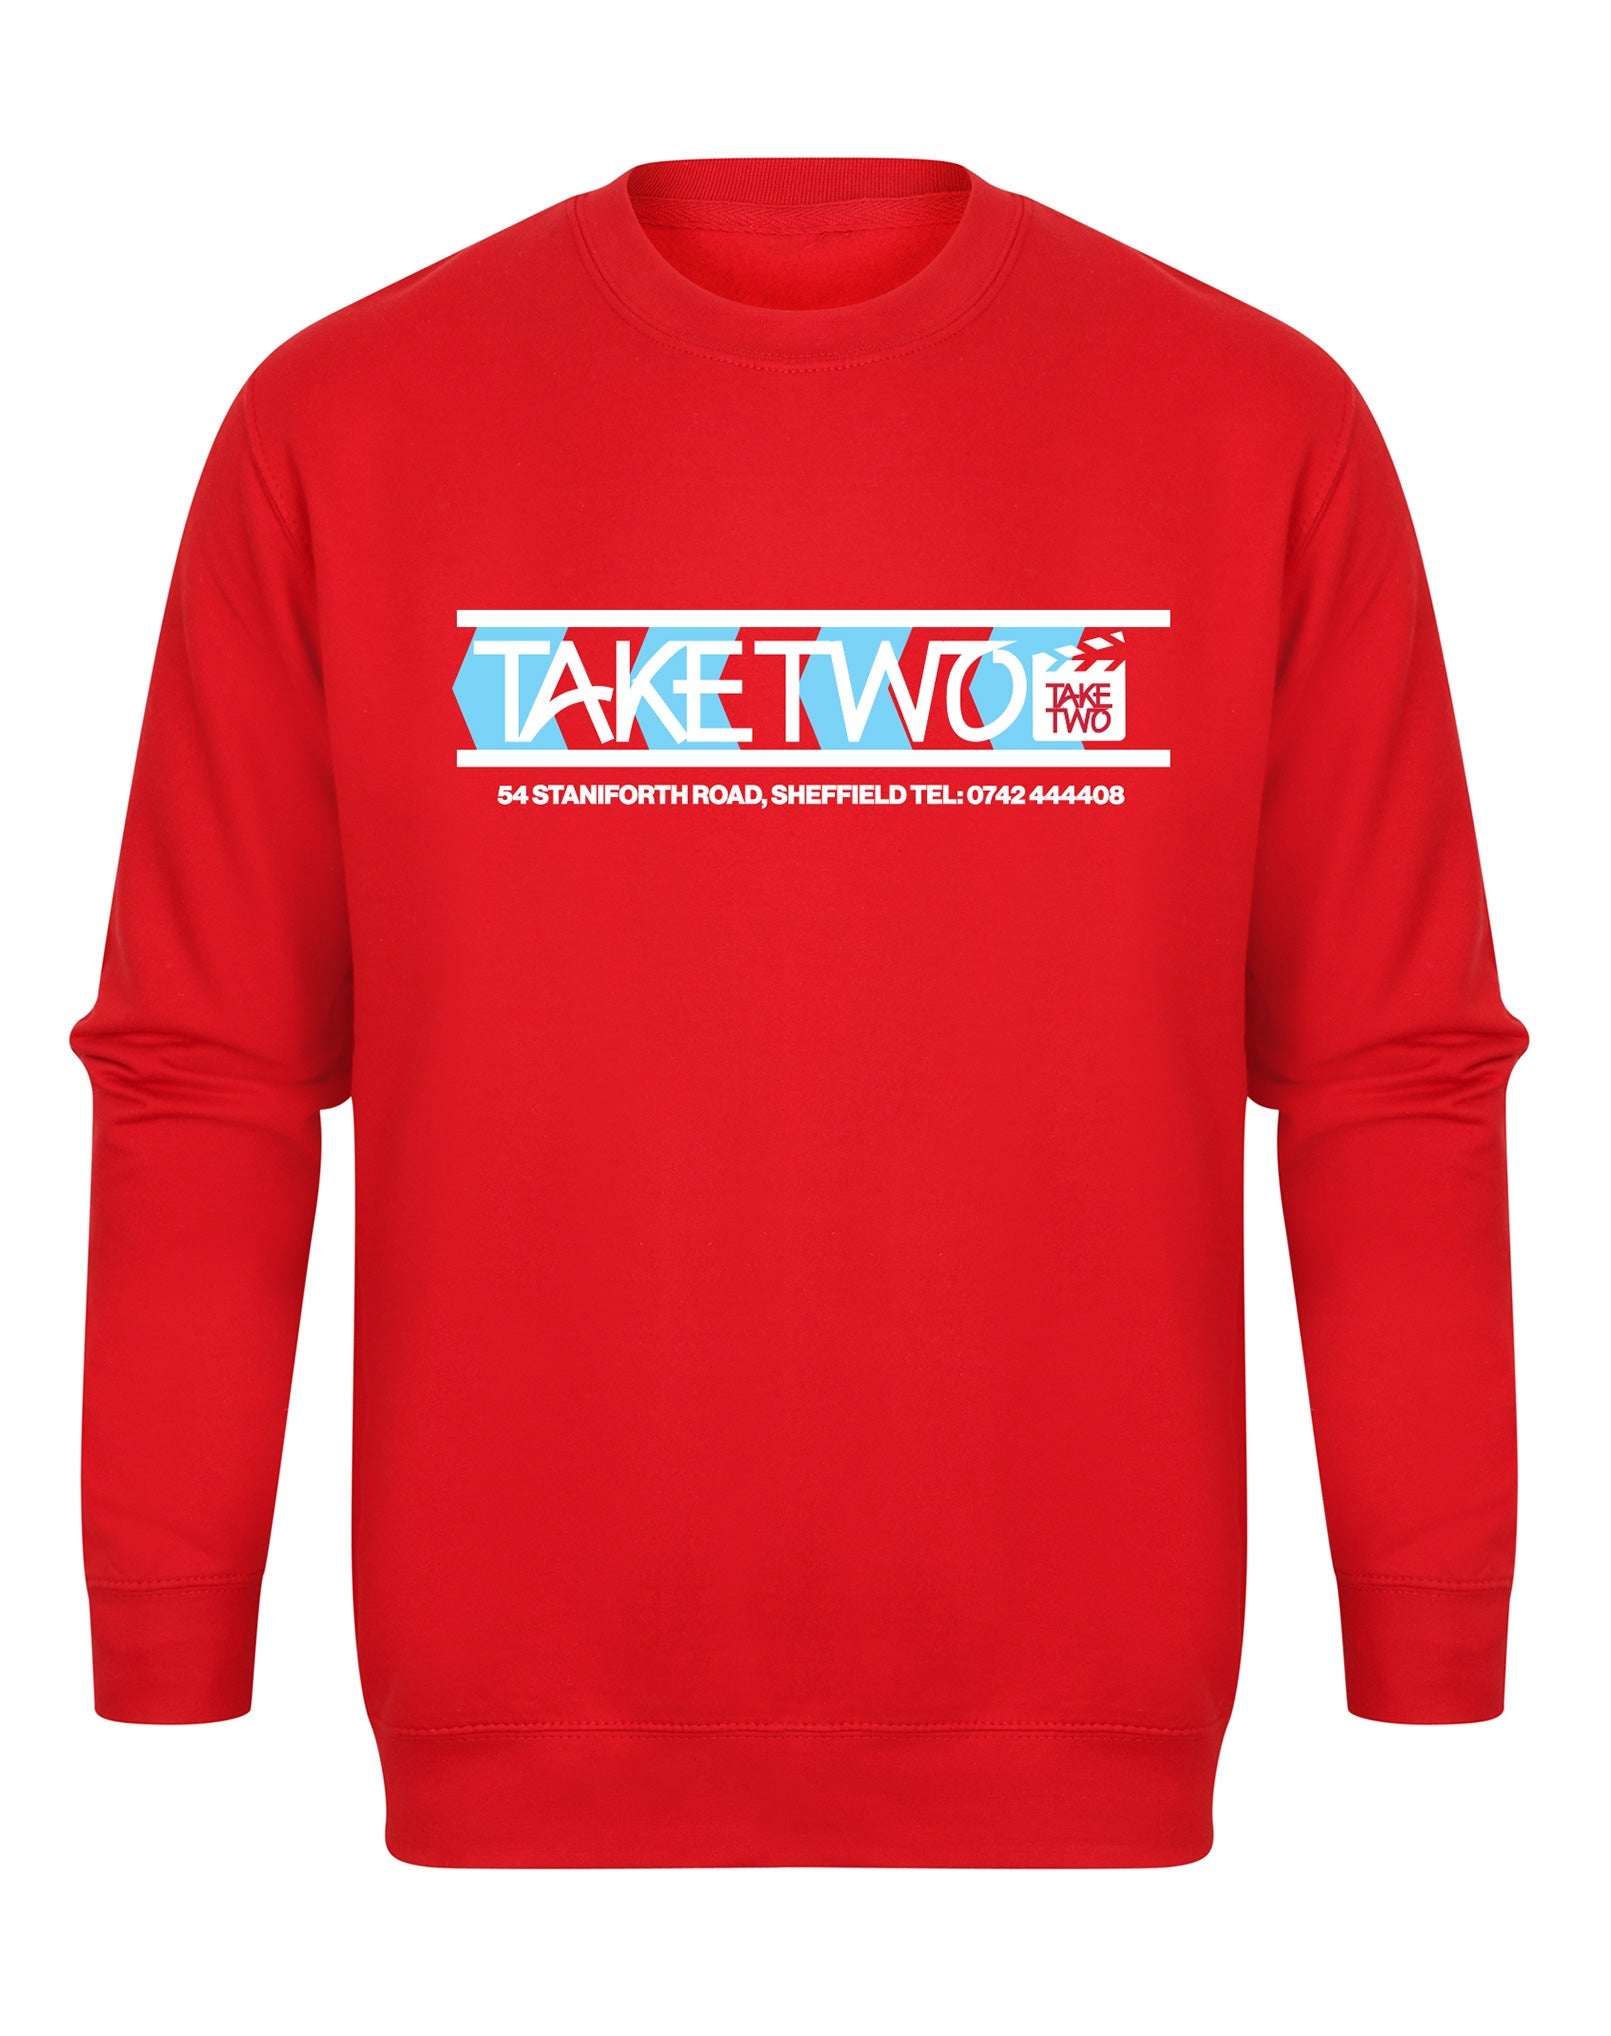 Take Two unisex fit sweatshirt - various colours - Dirty Stop Outs